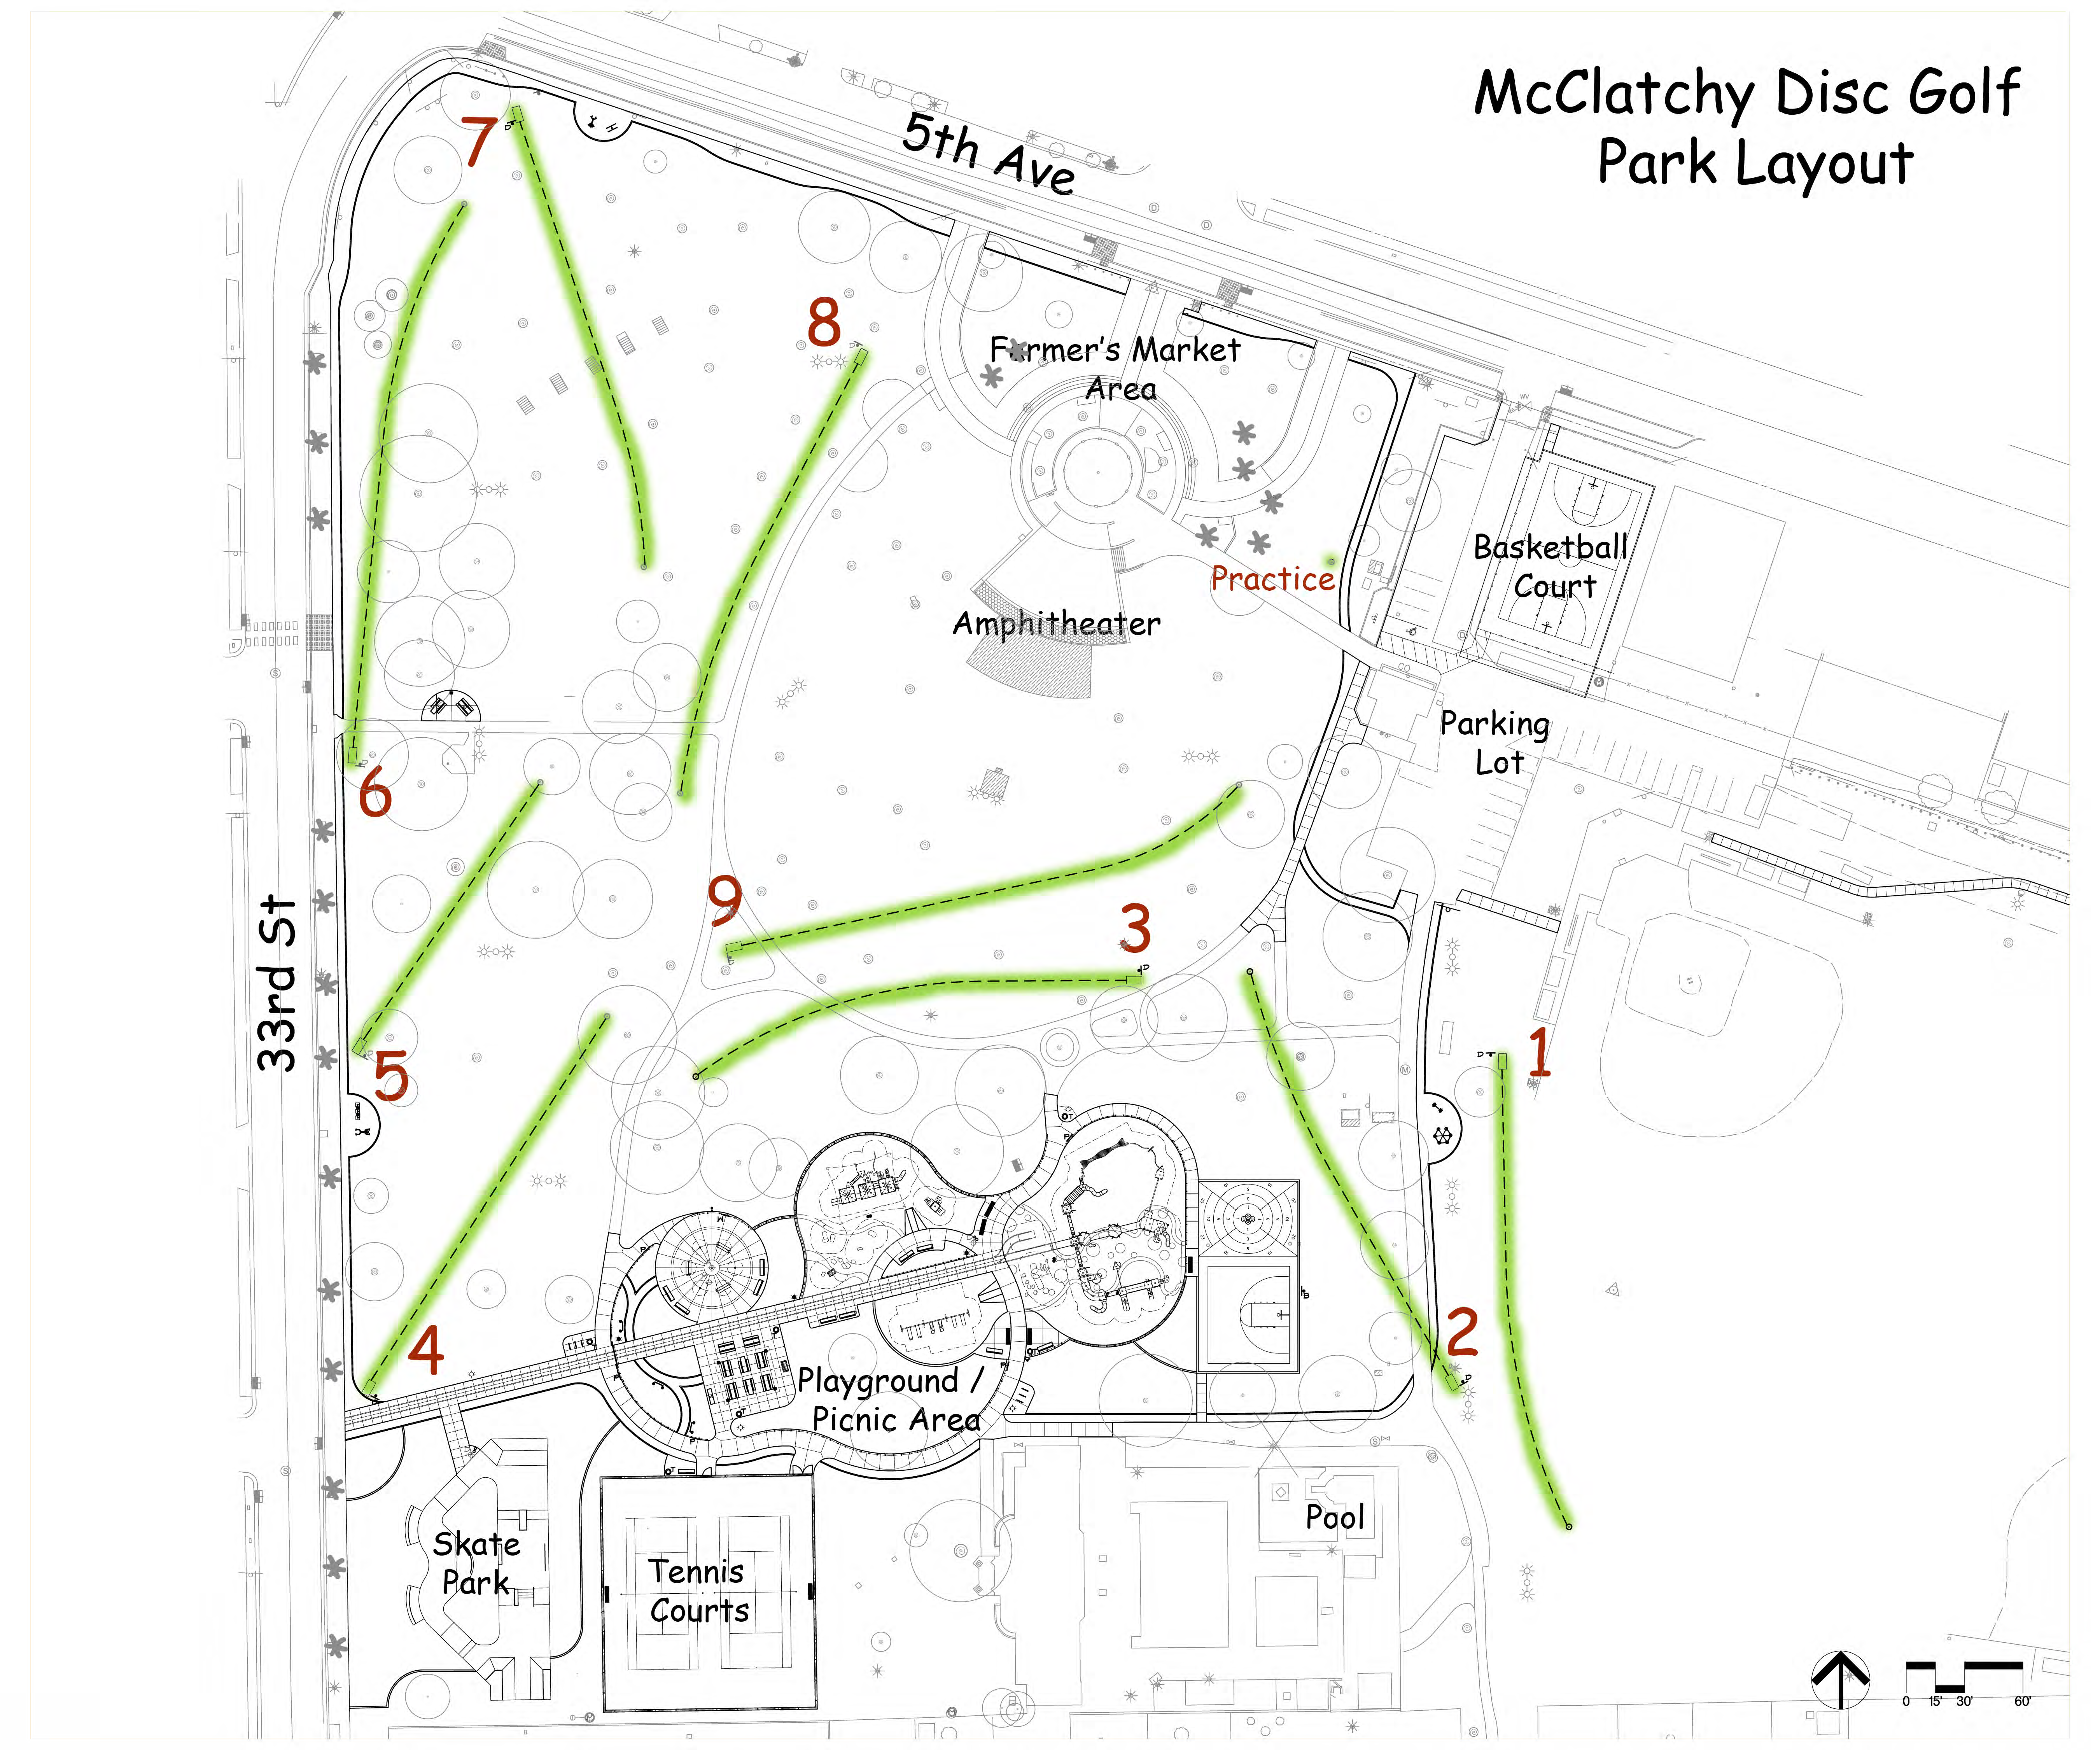 McClatchy Park and Disc Golf Course Grand Opening October 18th 5